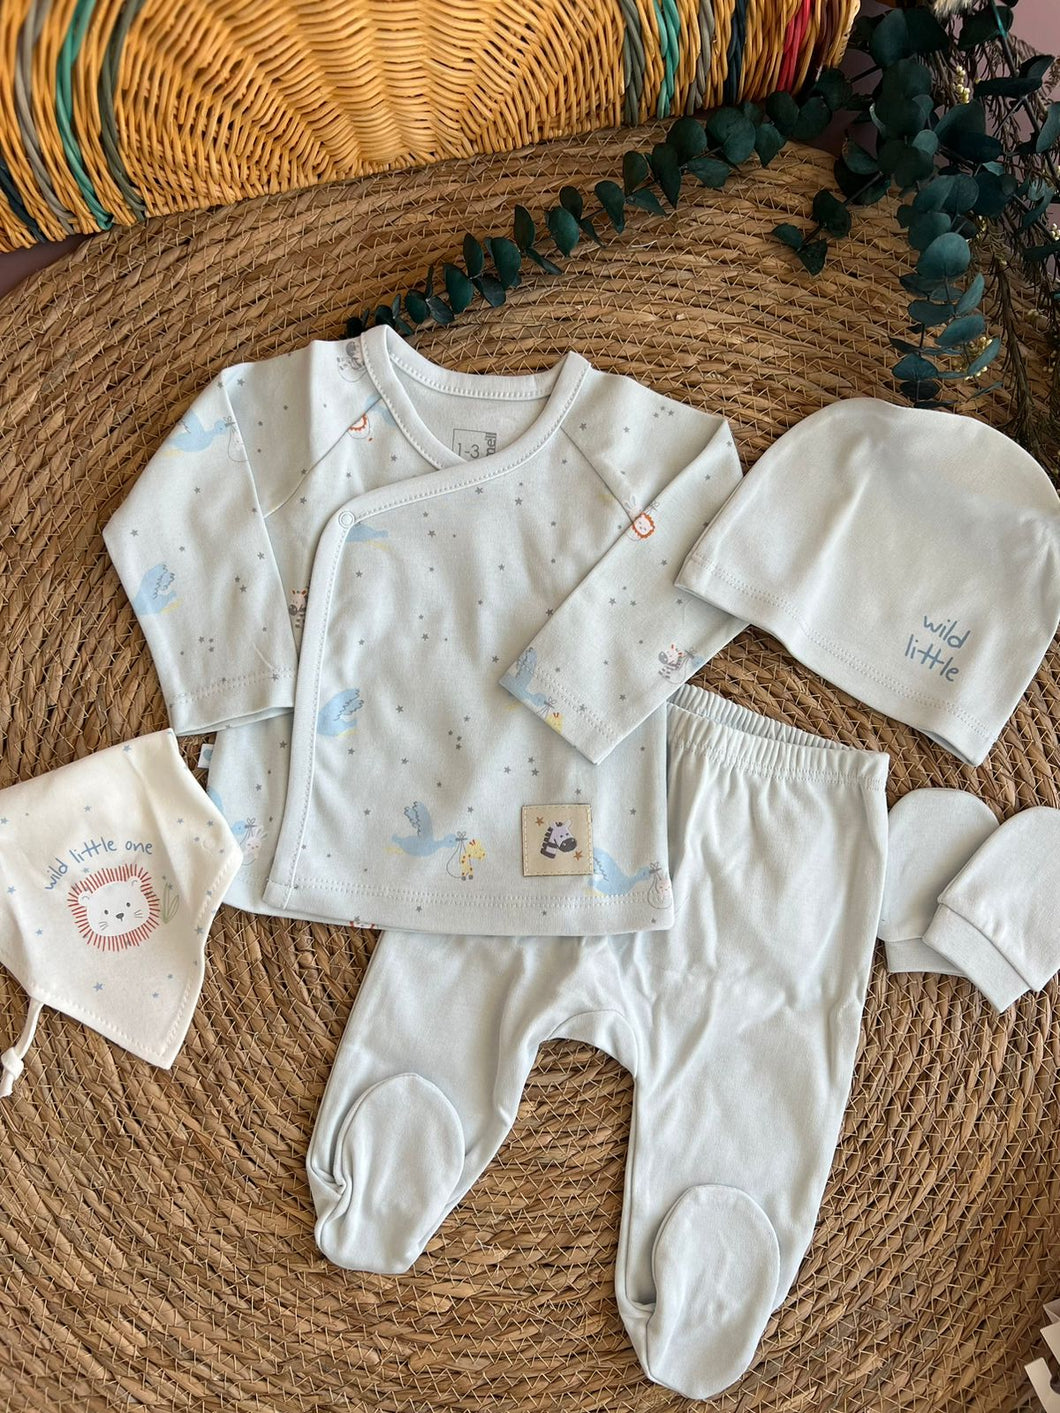 Wild Little One Hospital Set of 5 Pieces